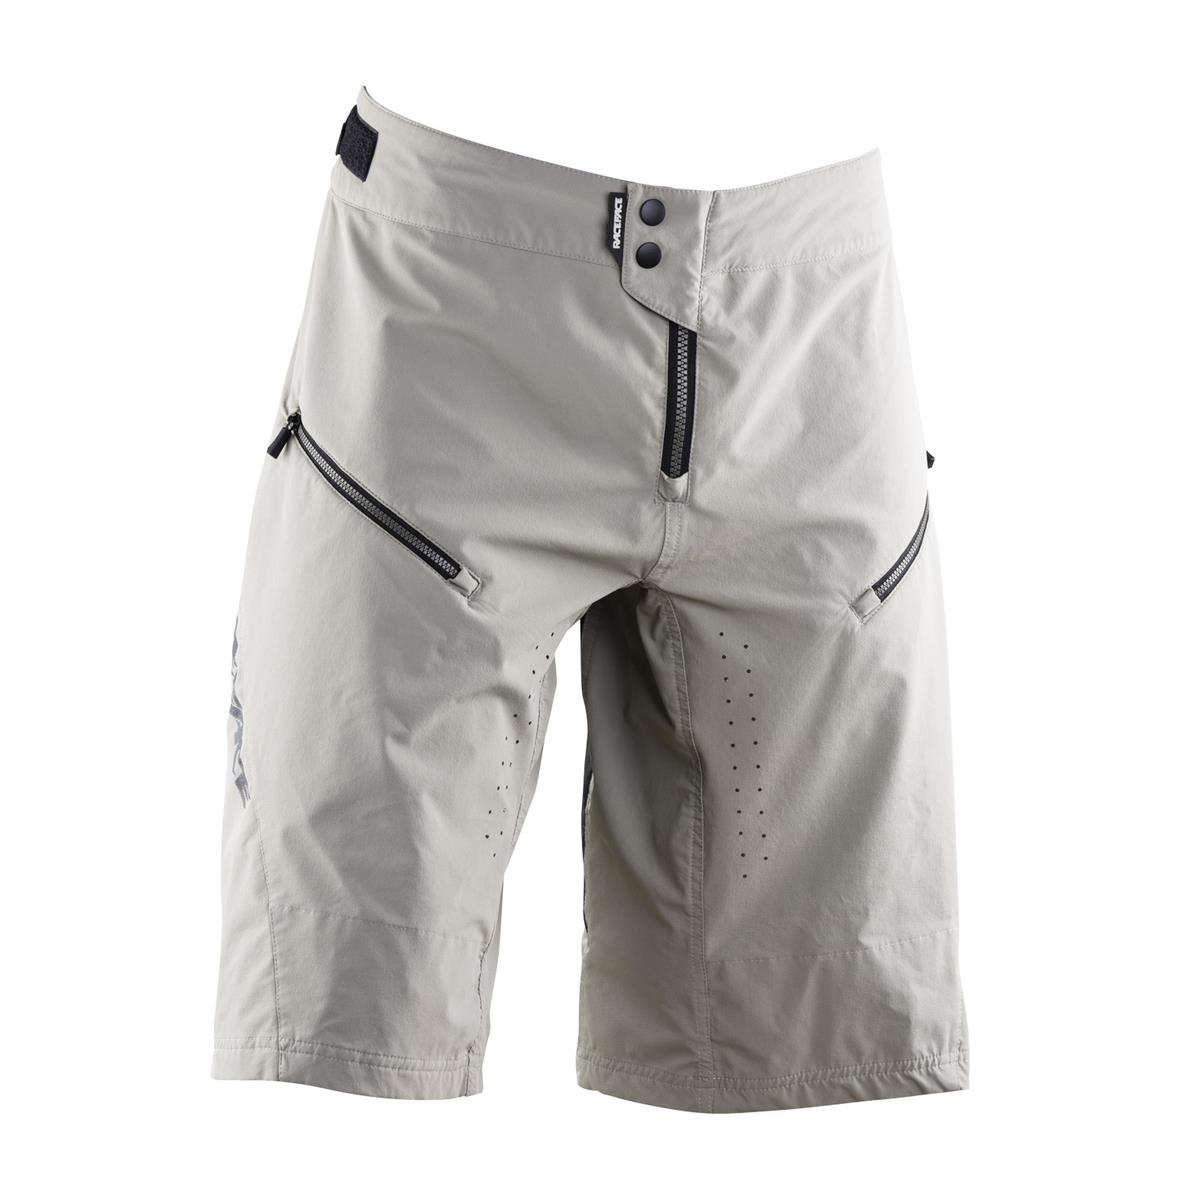 Race Face Trail Short Indy Gray